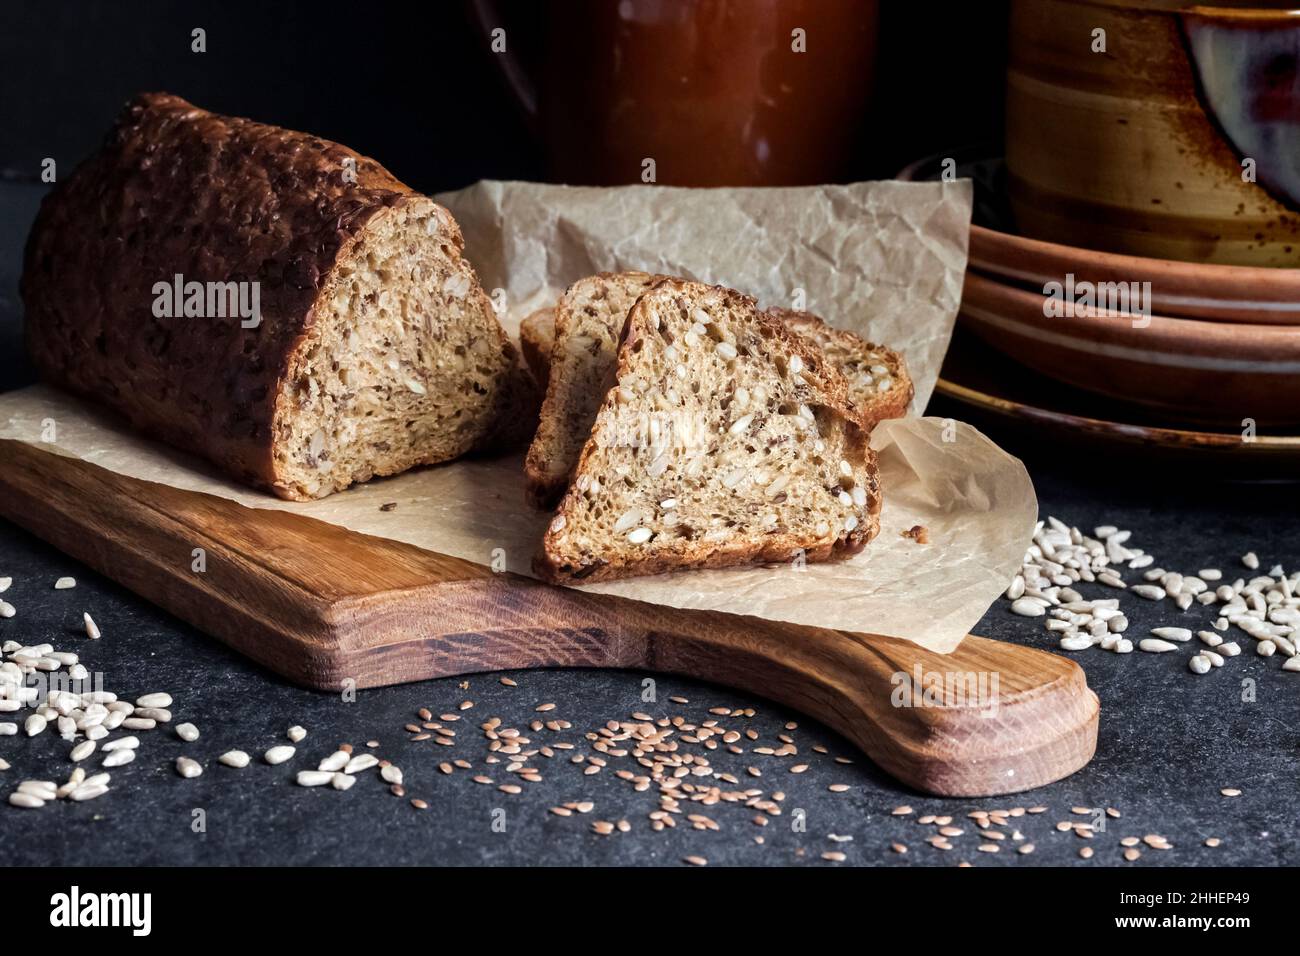 Bread with sunflower and flax seeds on a wooden cutting board. Ceramic crockery in the background. Stock Photo